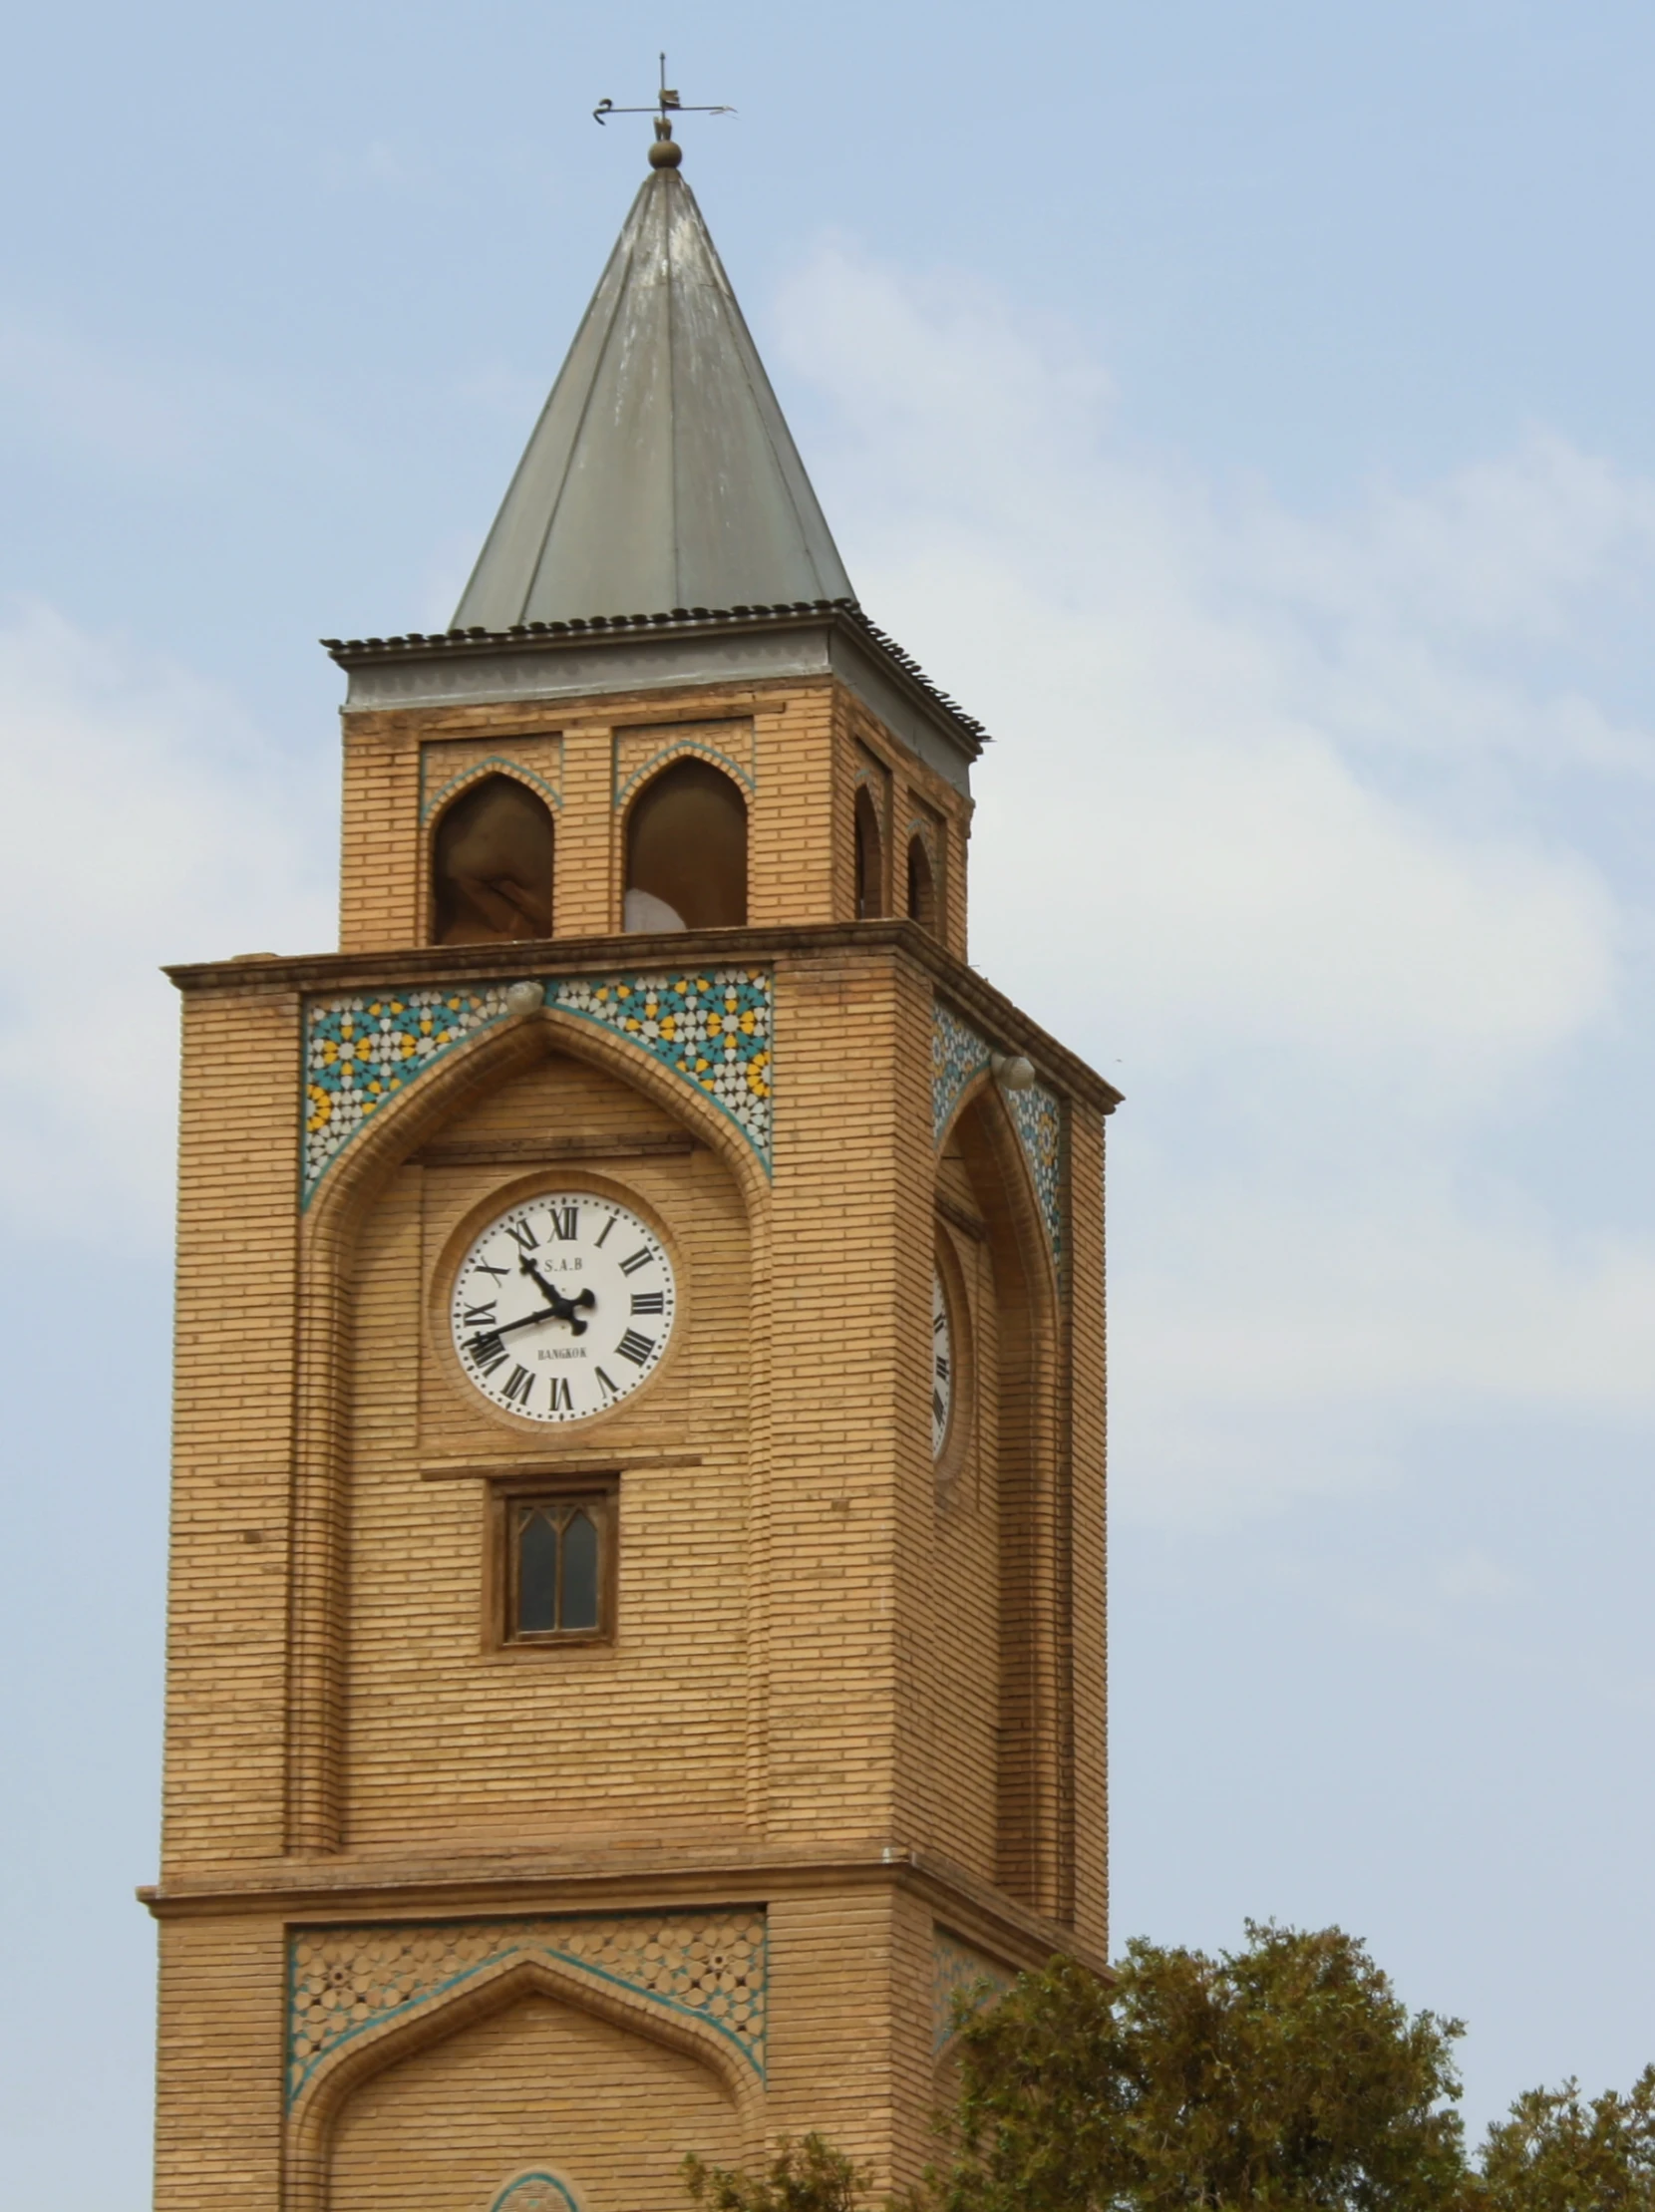 an ornate tower with a clock on it